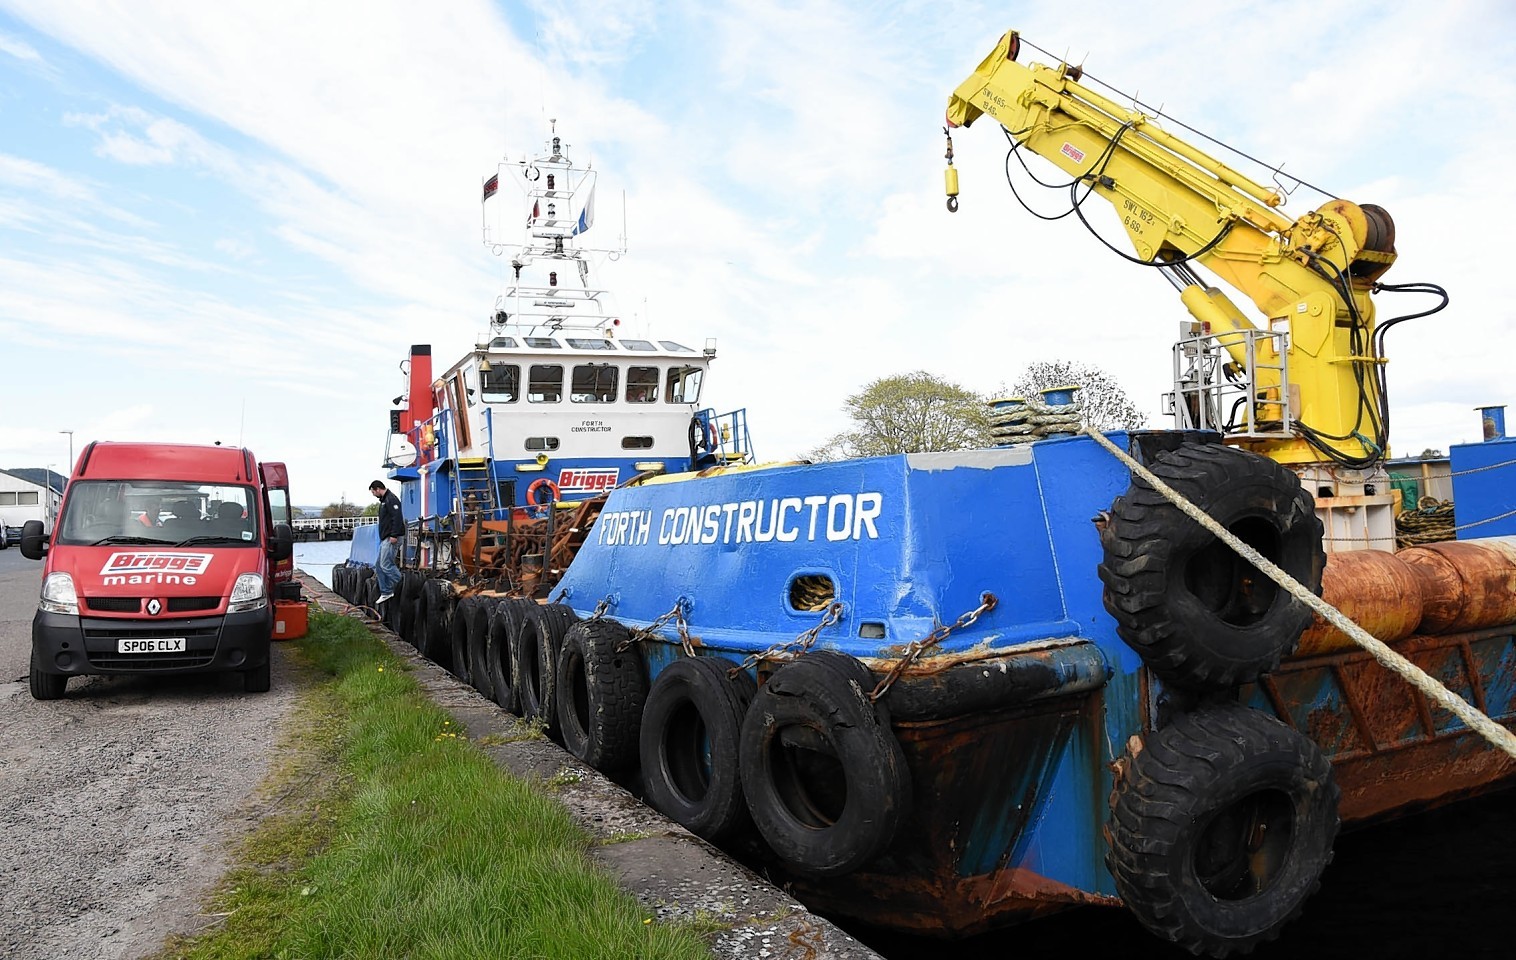 The Forth Constructor which was having repairs to a propellor when a car was discovered beside it at the Caledonian Canal, Inverness.